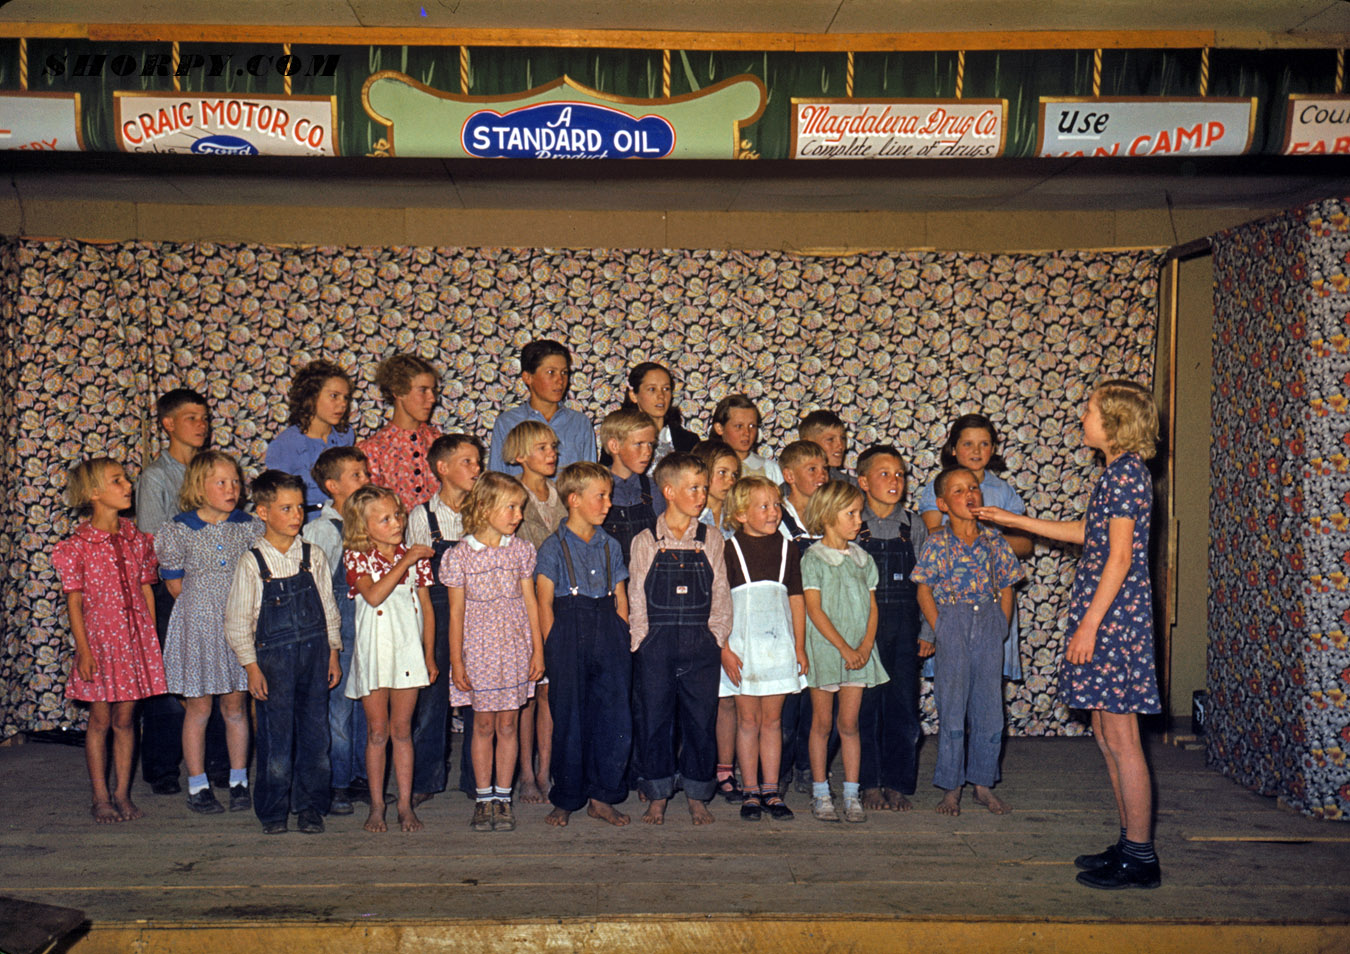 Pie Town schoolchildren singing. October 1940. View full size. 35mm Kodachrome by Russell Lee. Second boy from the right is "Pops" McKee, interviewed by Paul Hendrickson in the Smithsonian article on Pie Town.